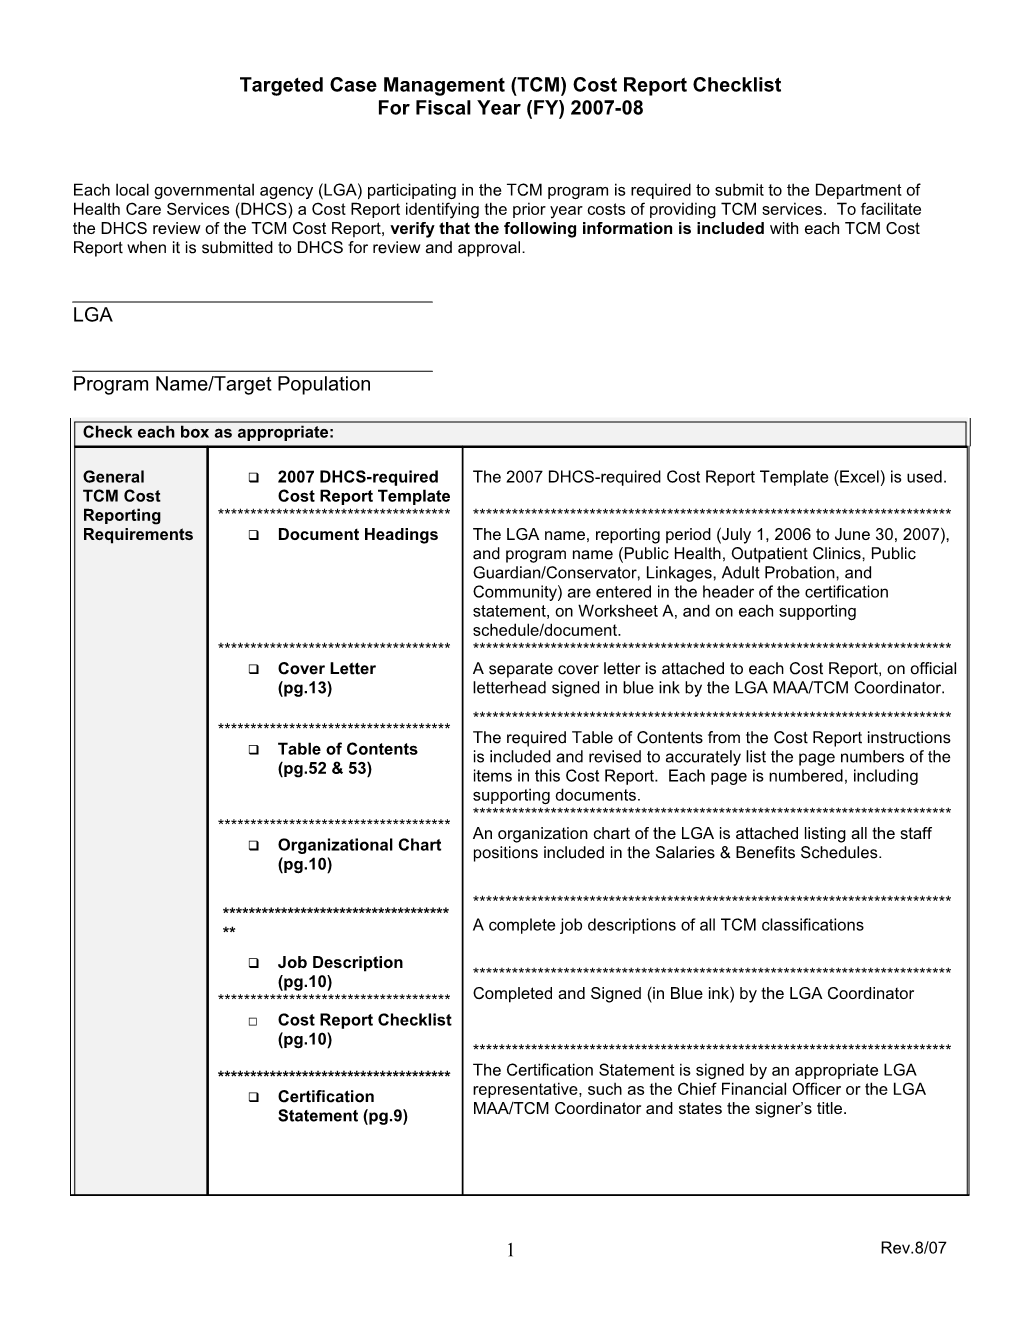 2007 Cost Report Checklist Revised 08-07